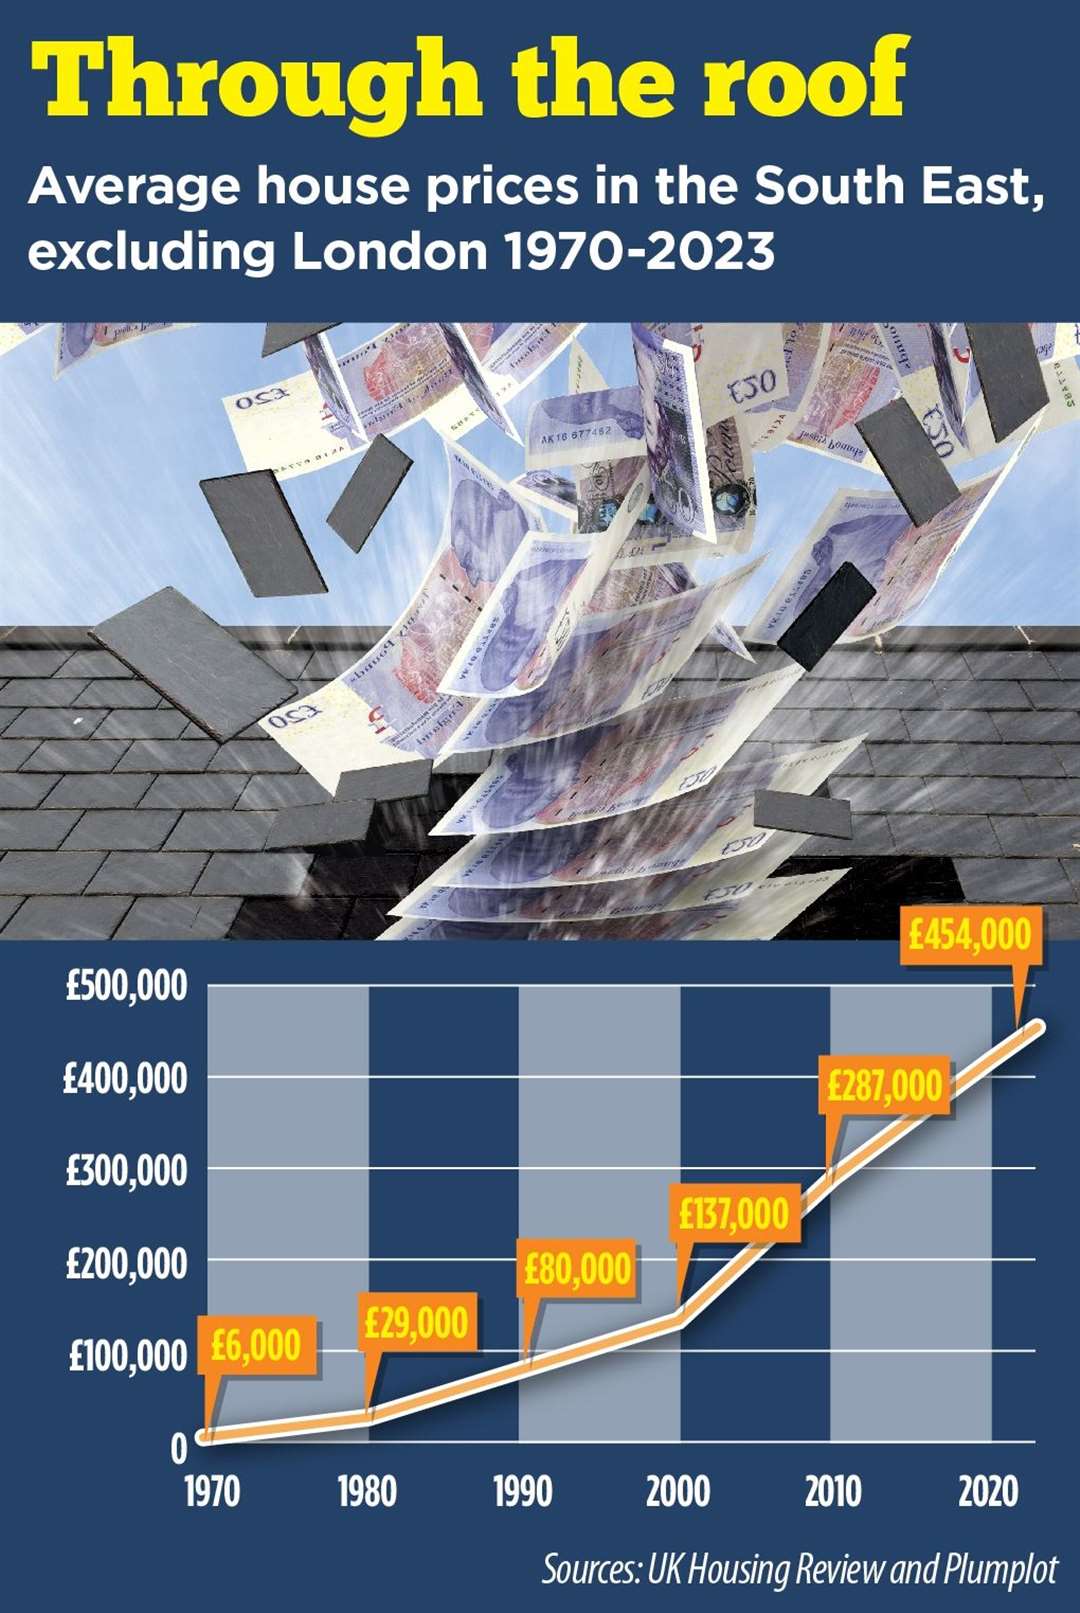 While the average home in the South East cost about £6,000 in 1970, now the figure is more than £450,000